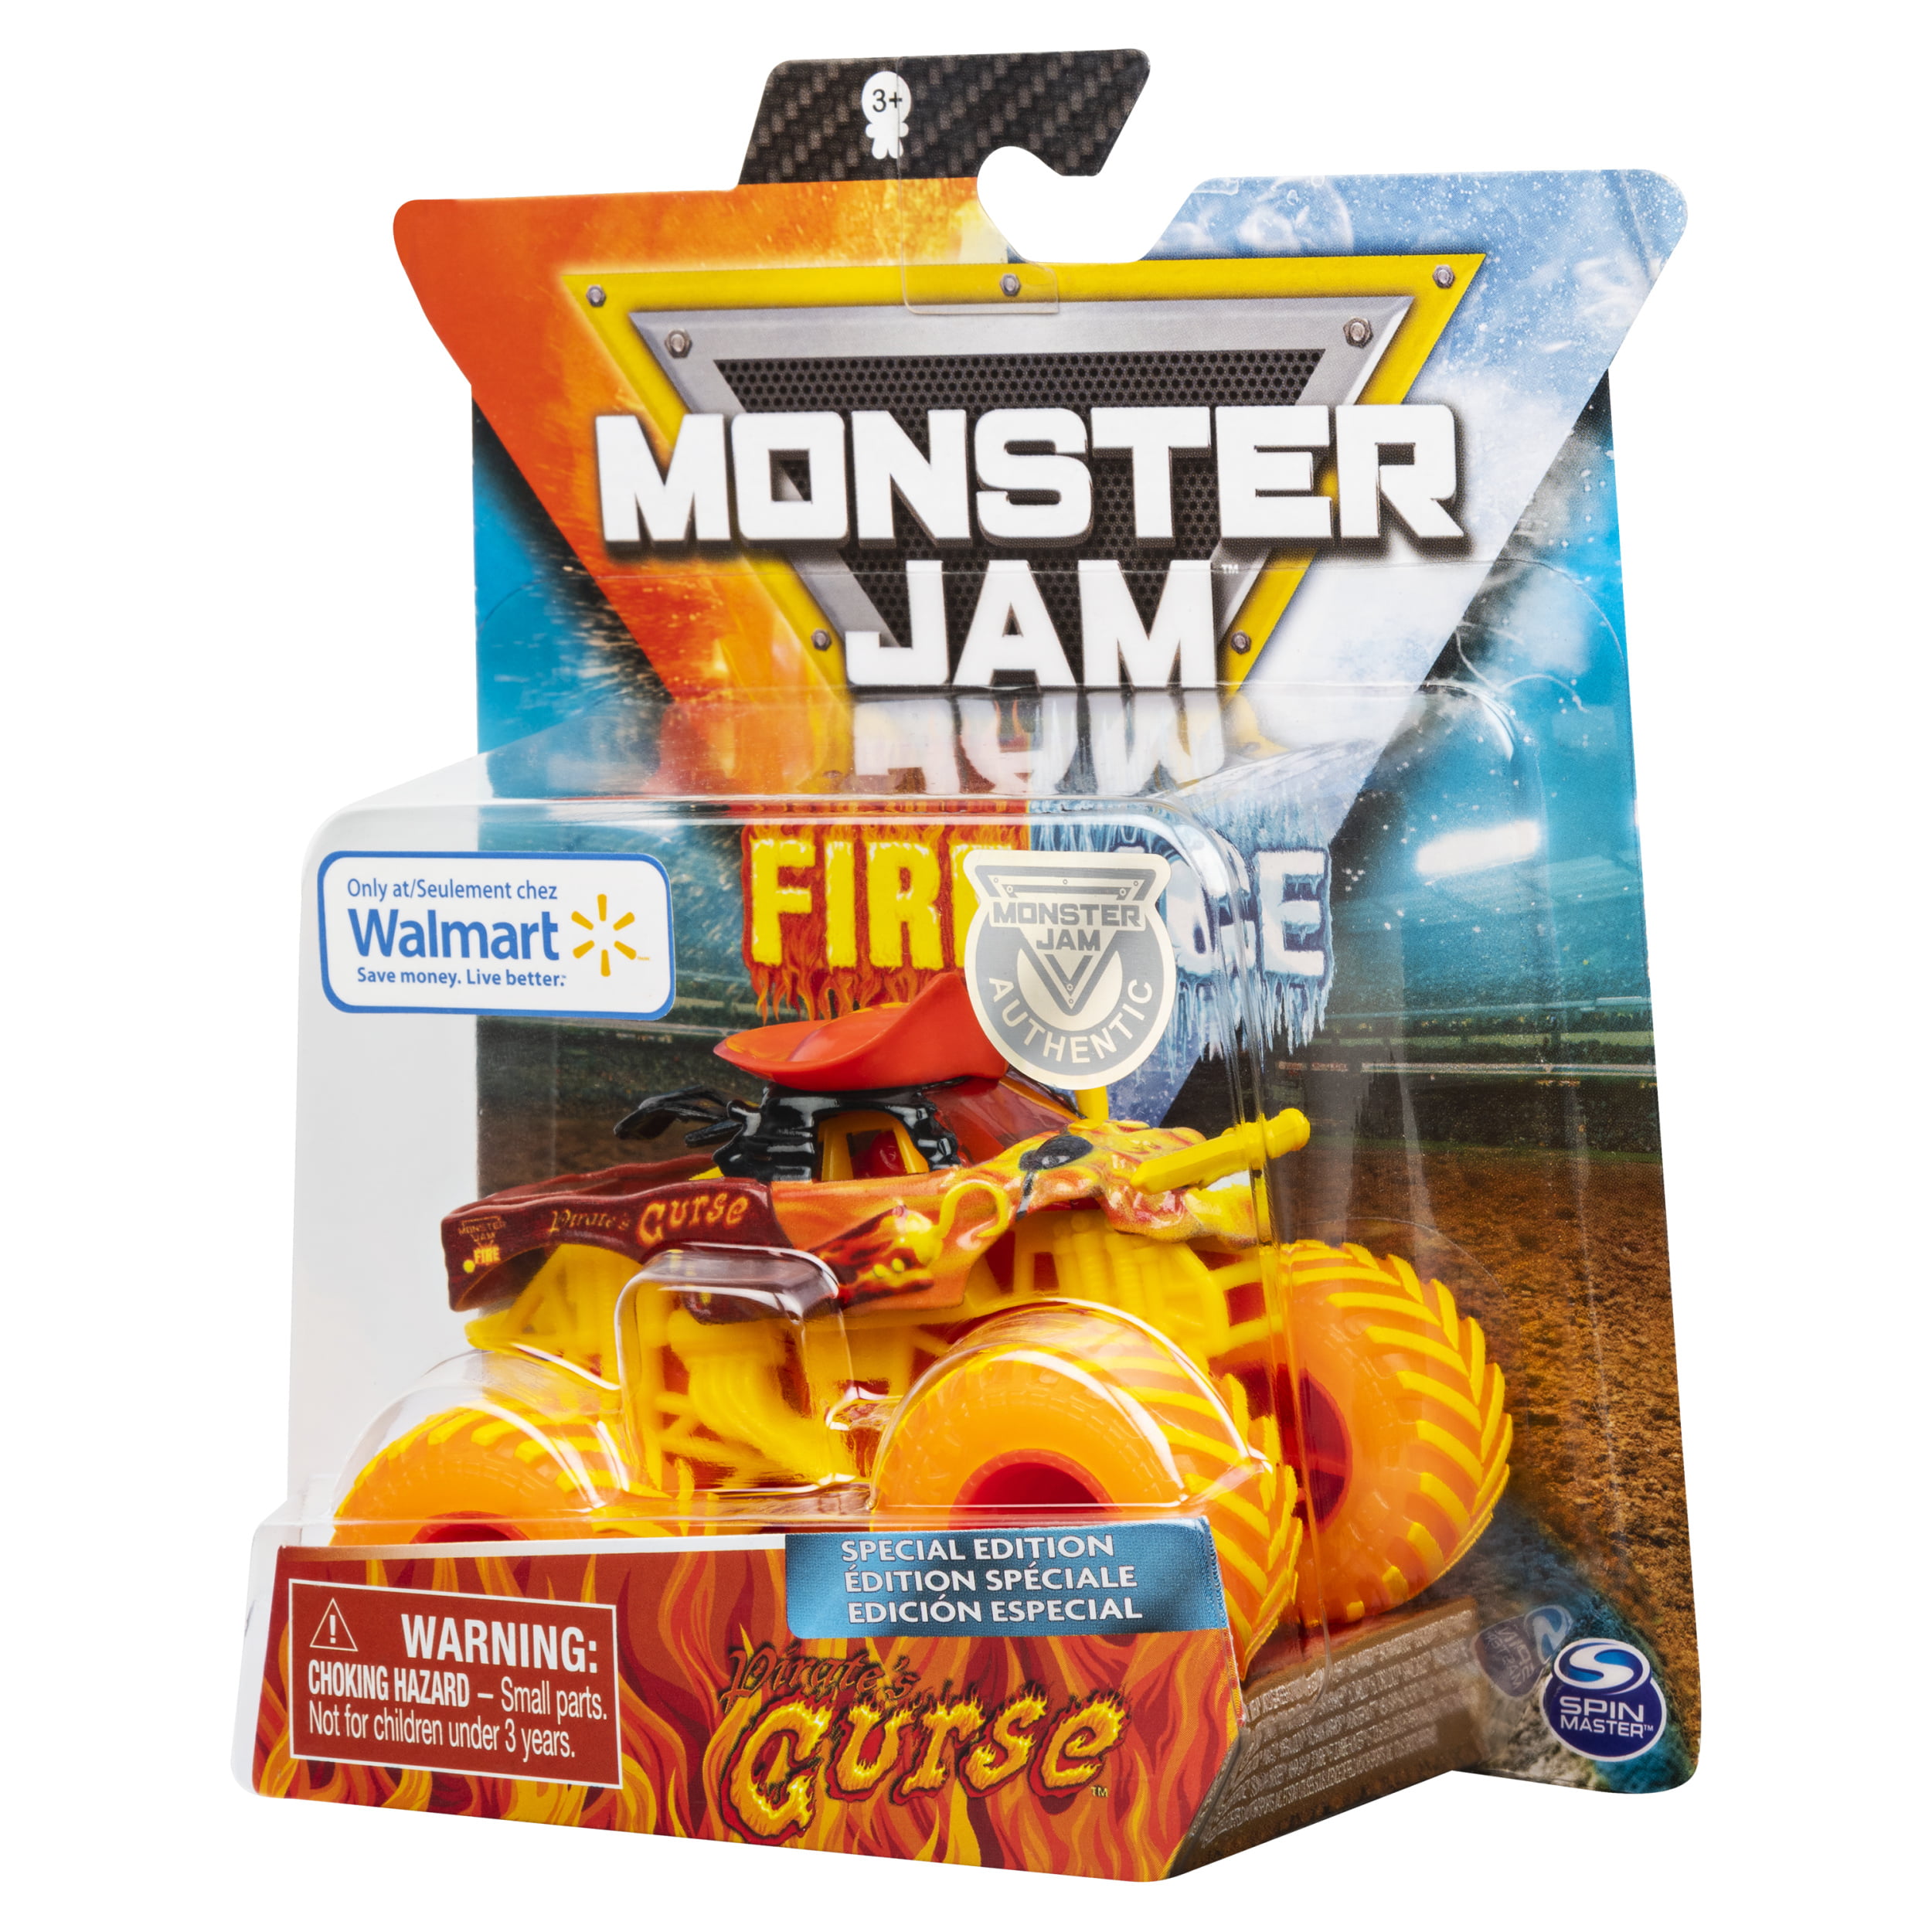 Monster Jam, Fire & Ice Pirate's Curse Monster Truck, Die-Cast Vehicle,  Walmart Exclusive, 1:64 Scale